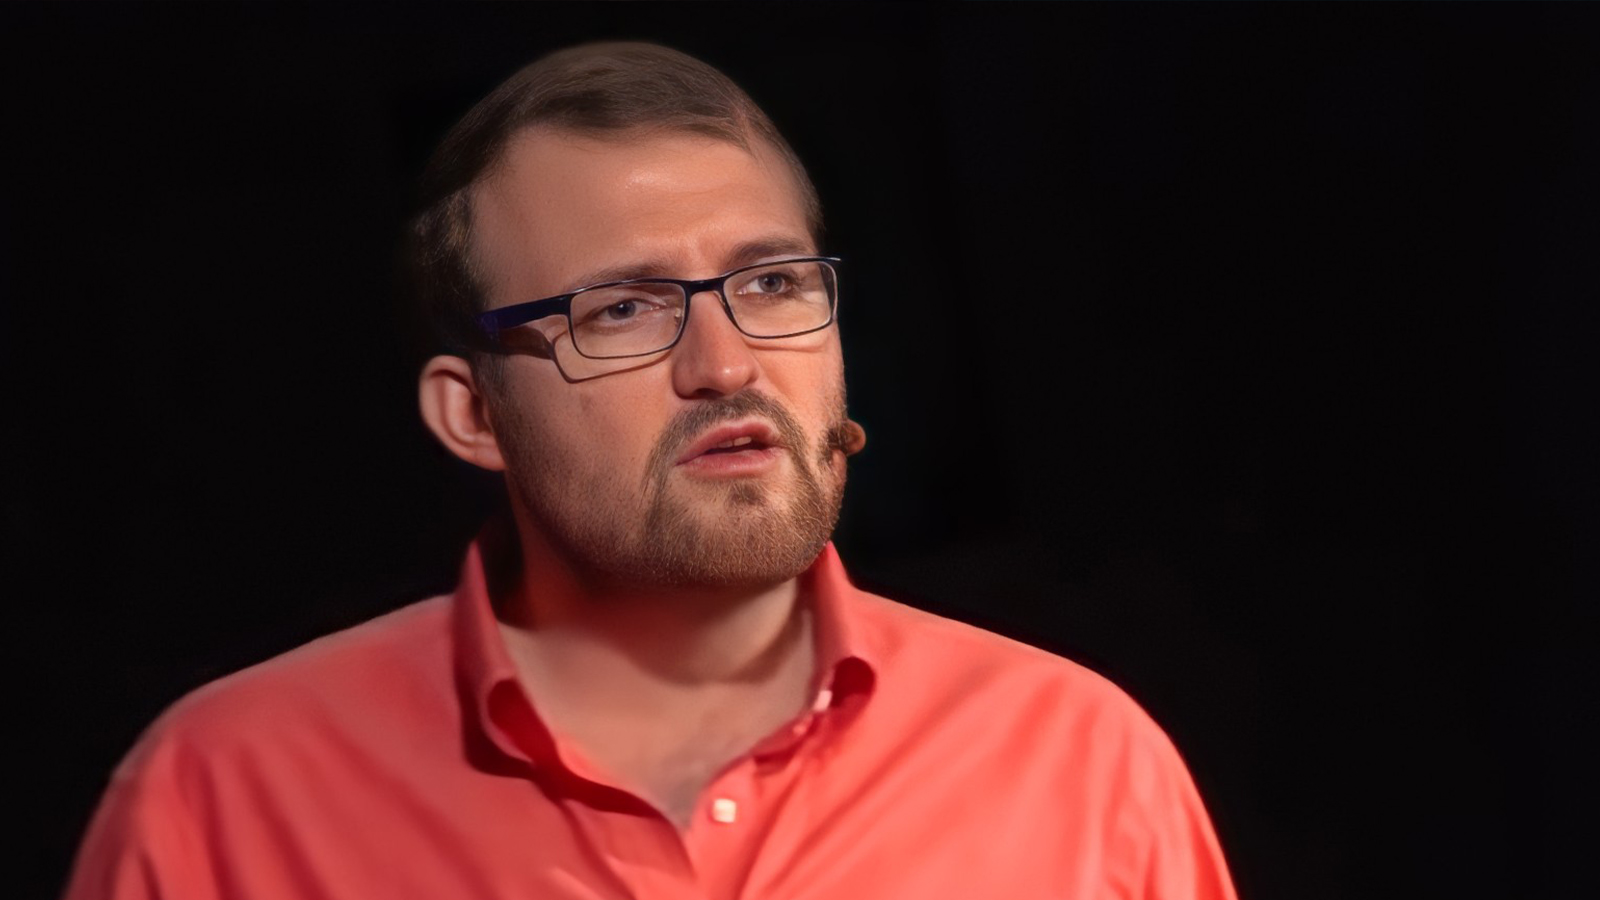 Cardano’s Charles Hoskinson Comments on ADA Price Drop